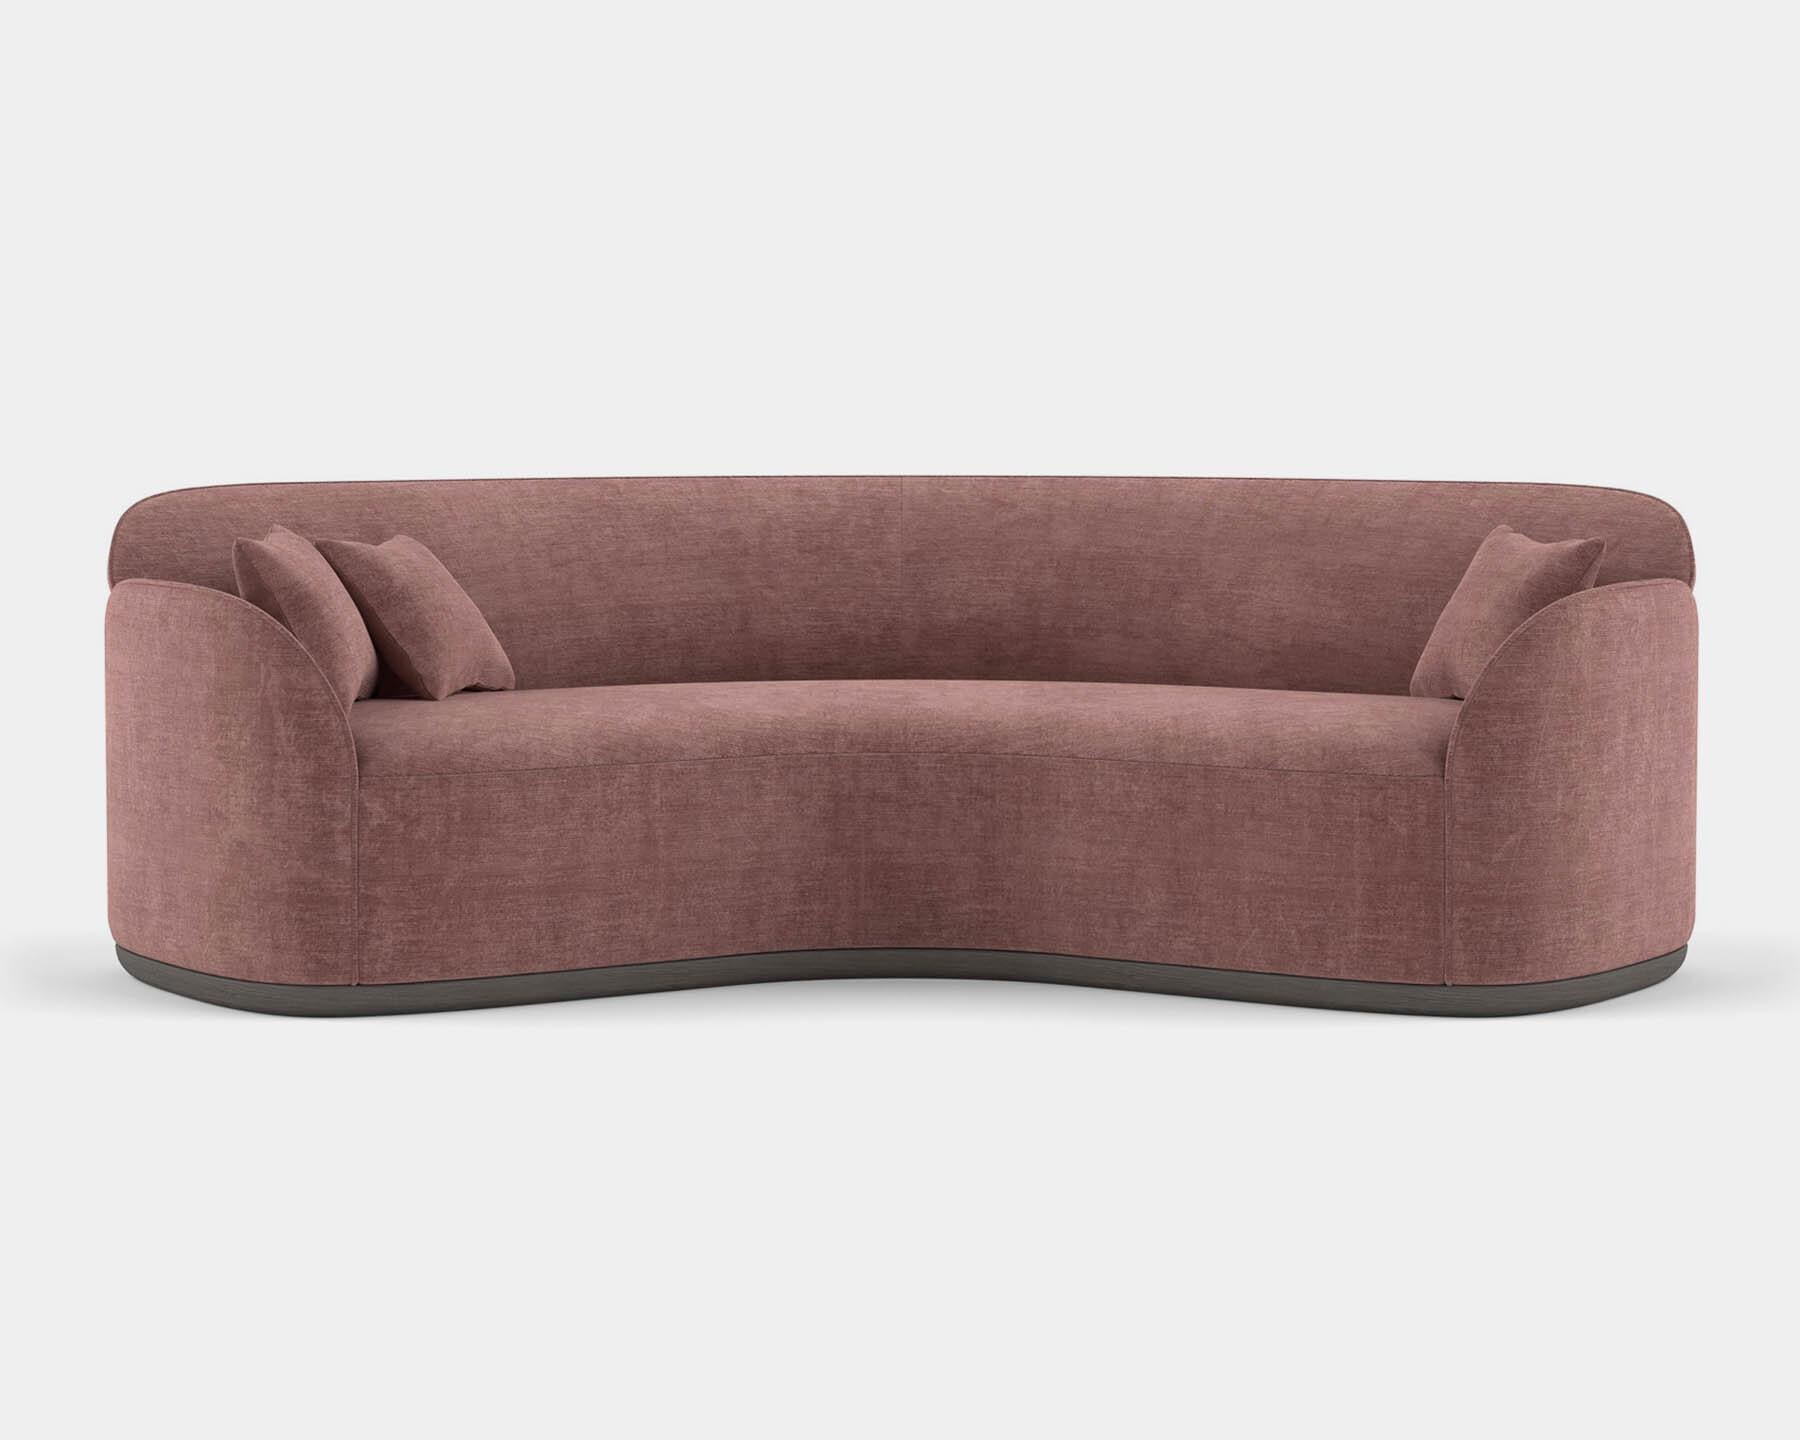 Contemporary Curved Sofa 'Unio' by Poiat, Tiger Mountain - Dedar For Sale 1